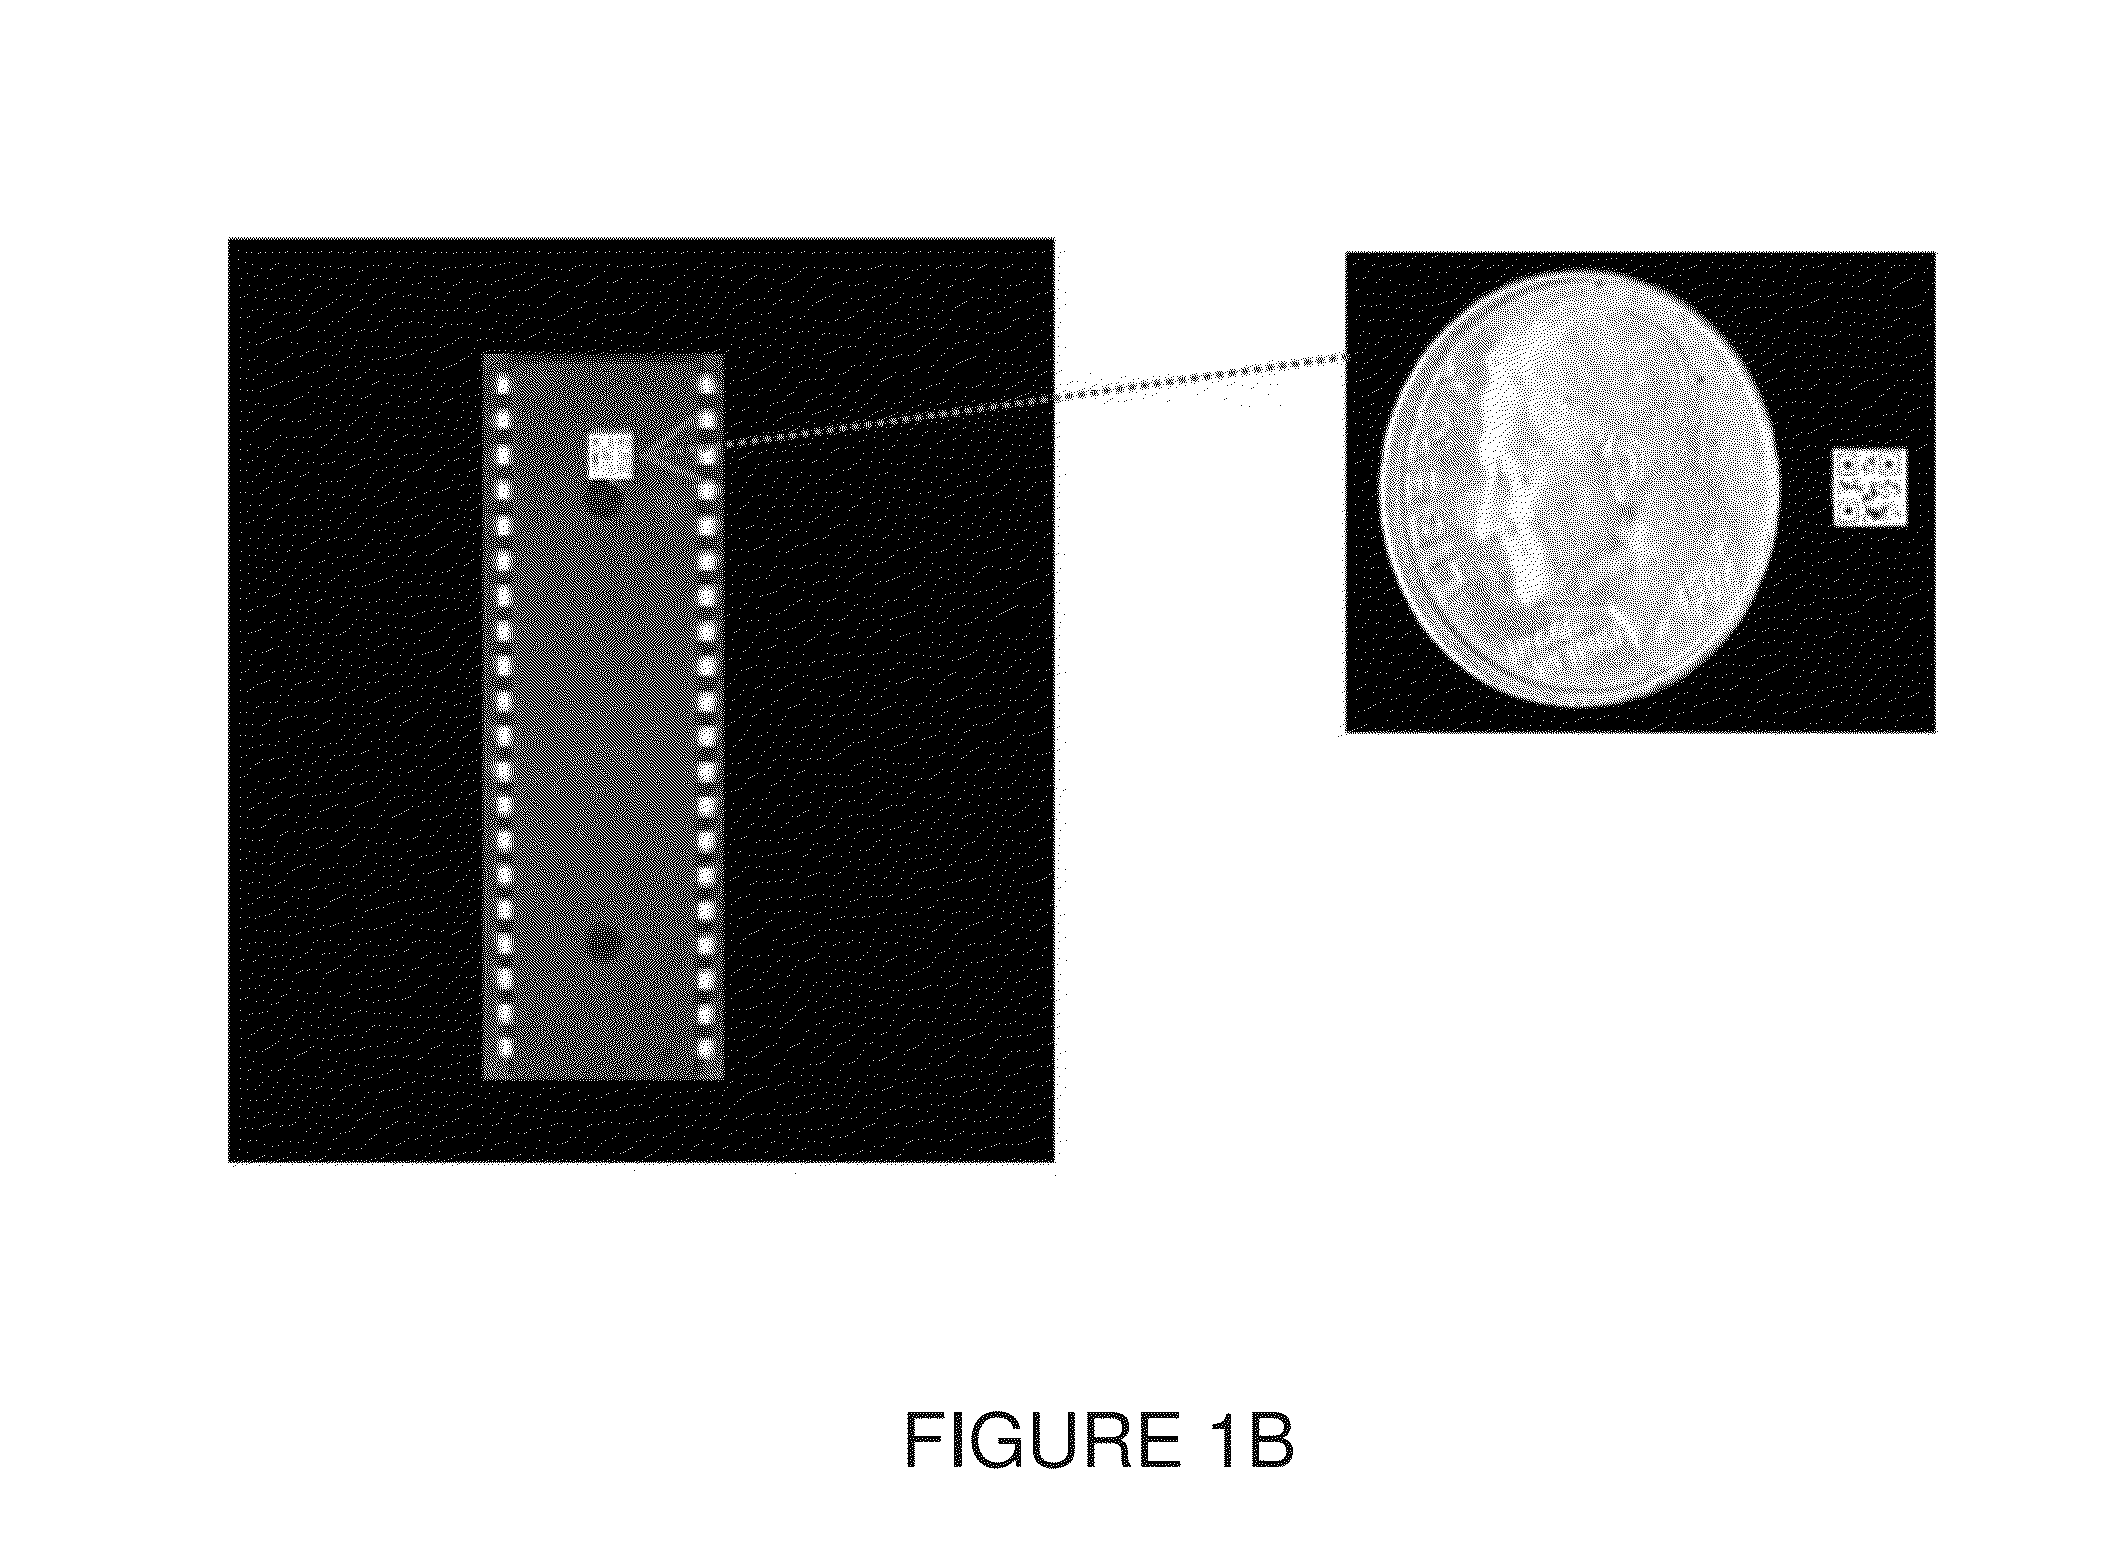 Method and System for Verification and Authentication Using Optically Encoded QR Codes